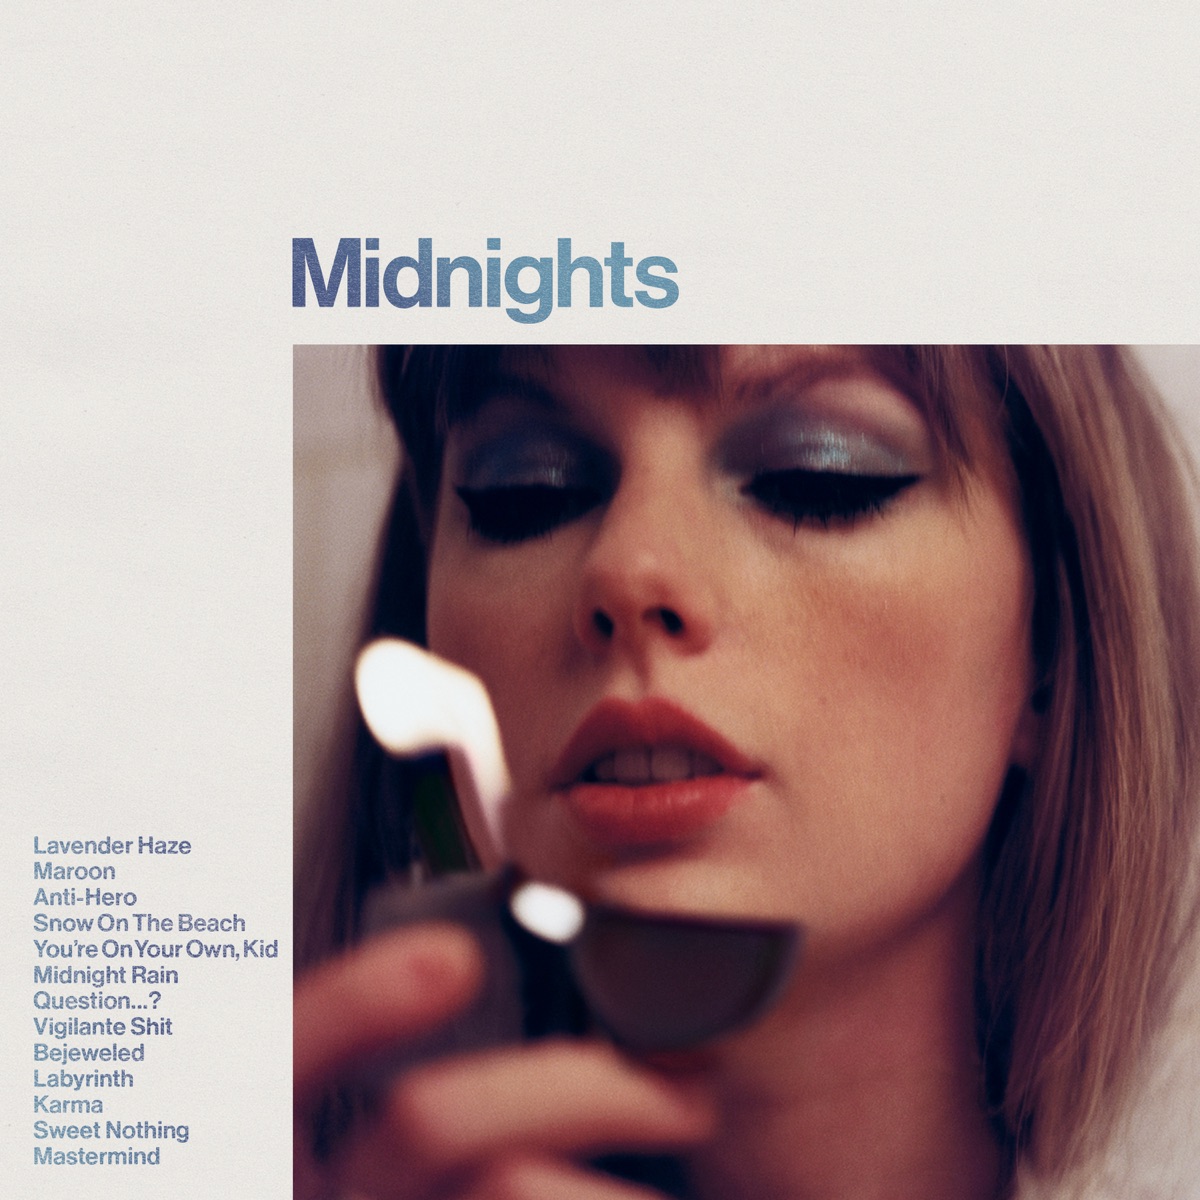 Taylor Swift: Midnights CD Collection (All 4 Variants)